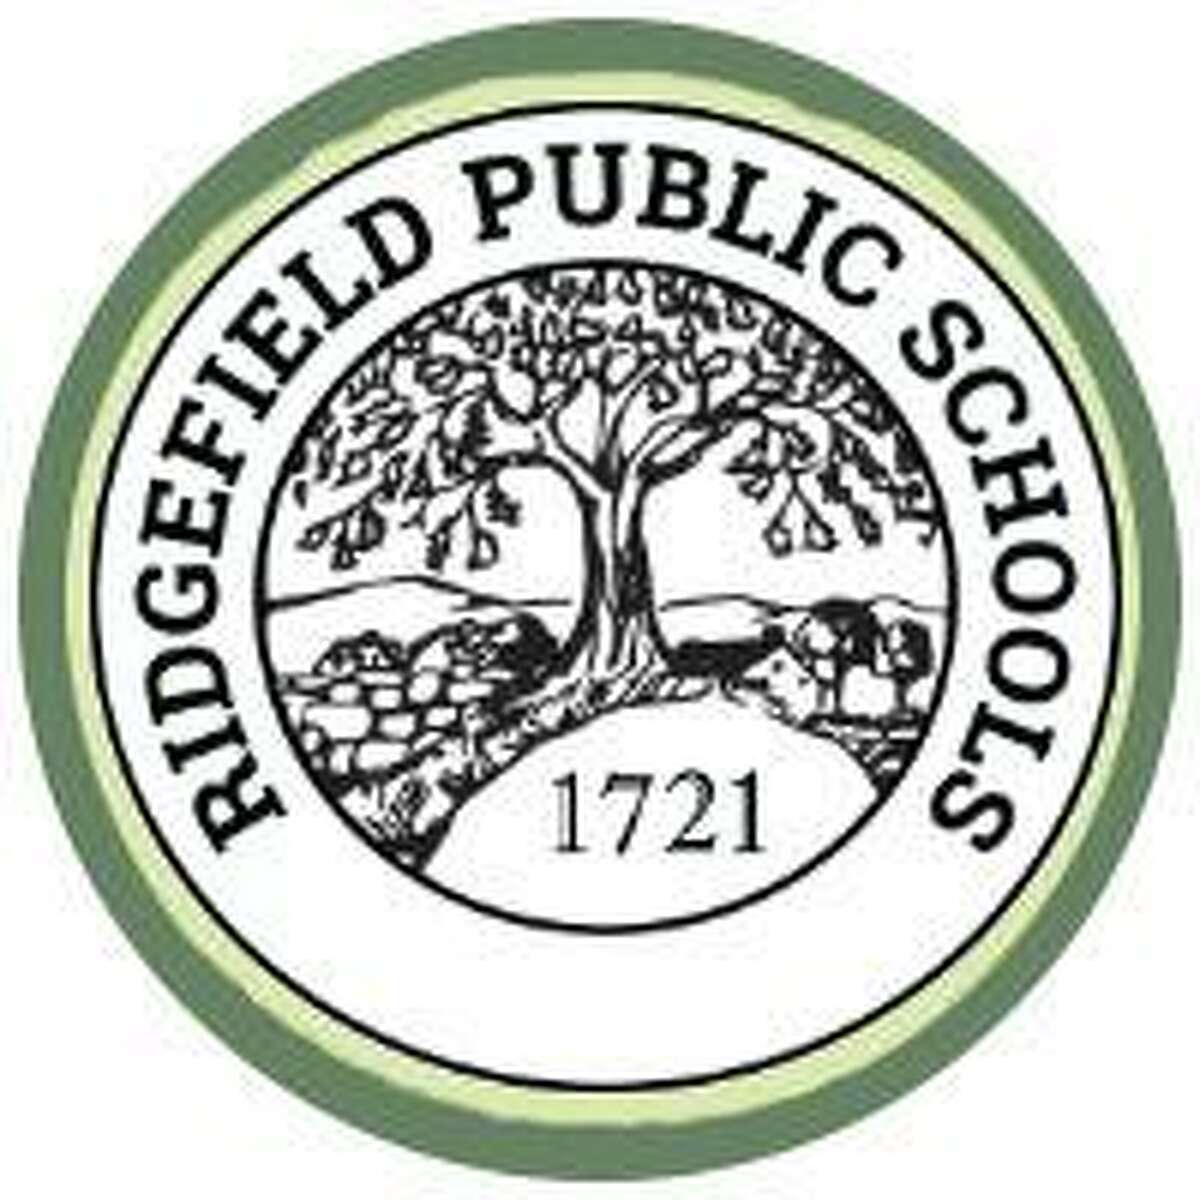 As part of the RPS Mission statement, the district commits to partnering with the community to “build an inclusive climate of trust, safety, and respect.”